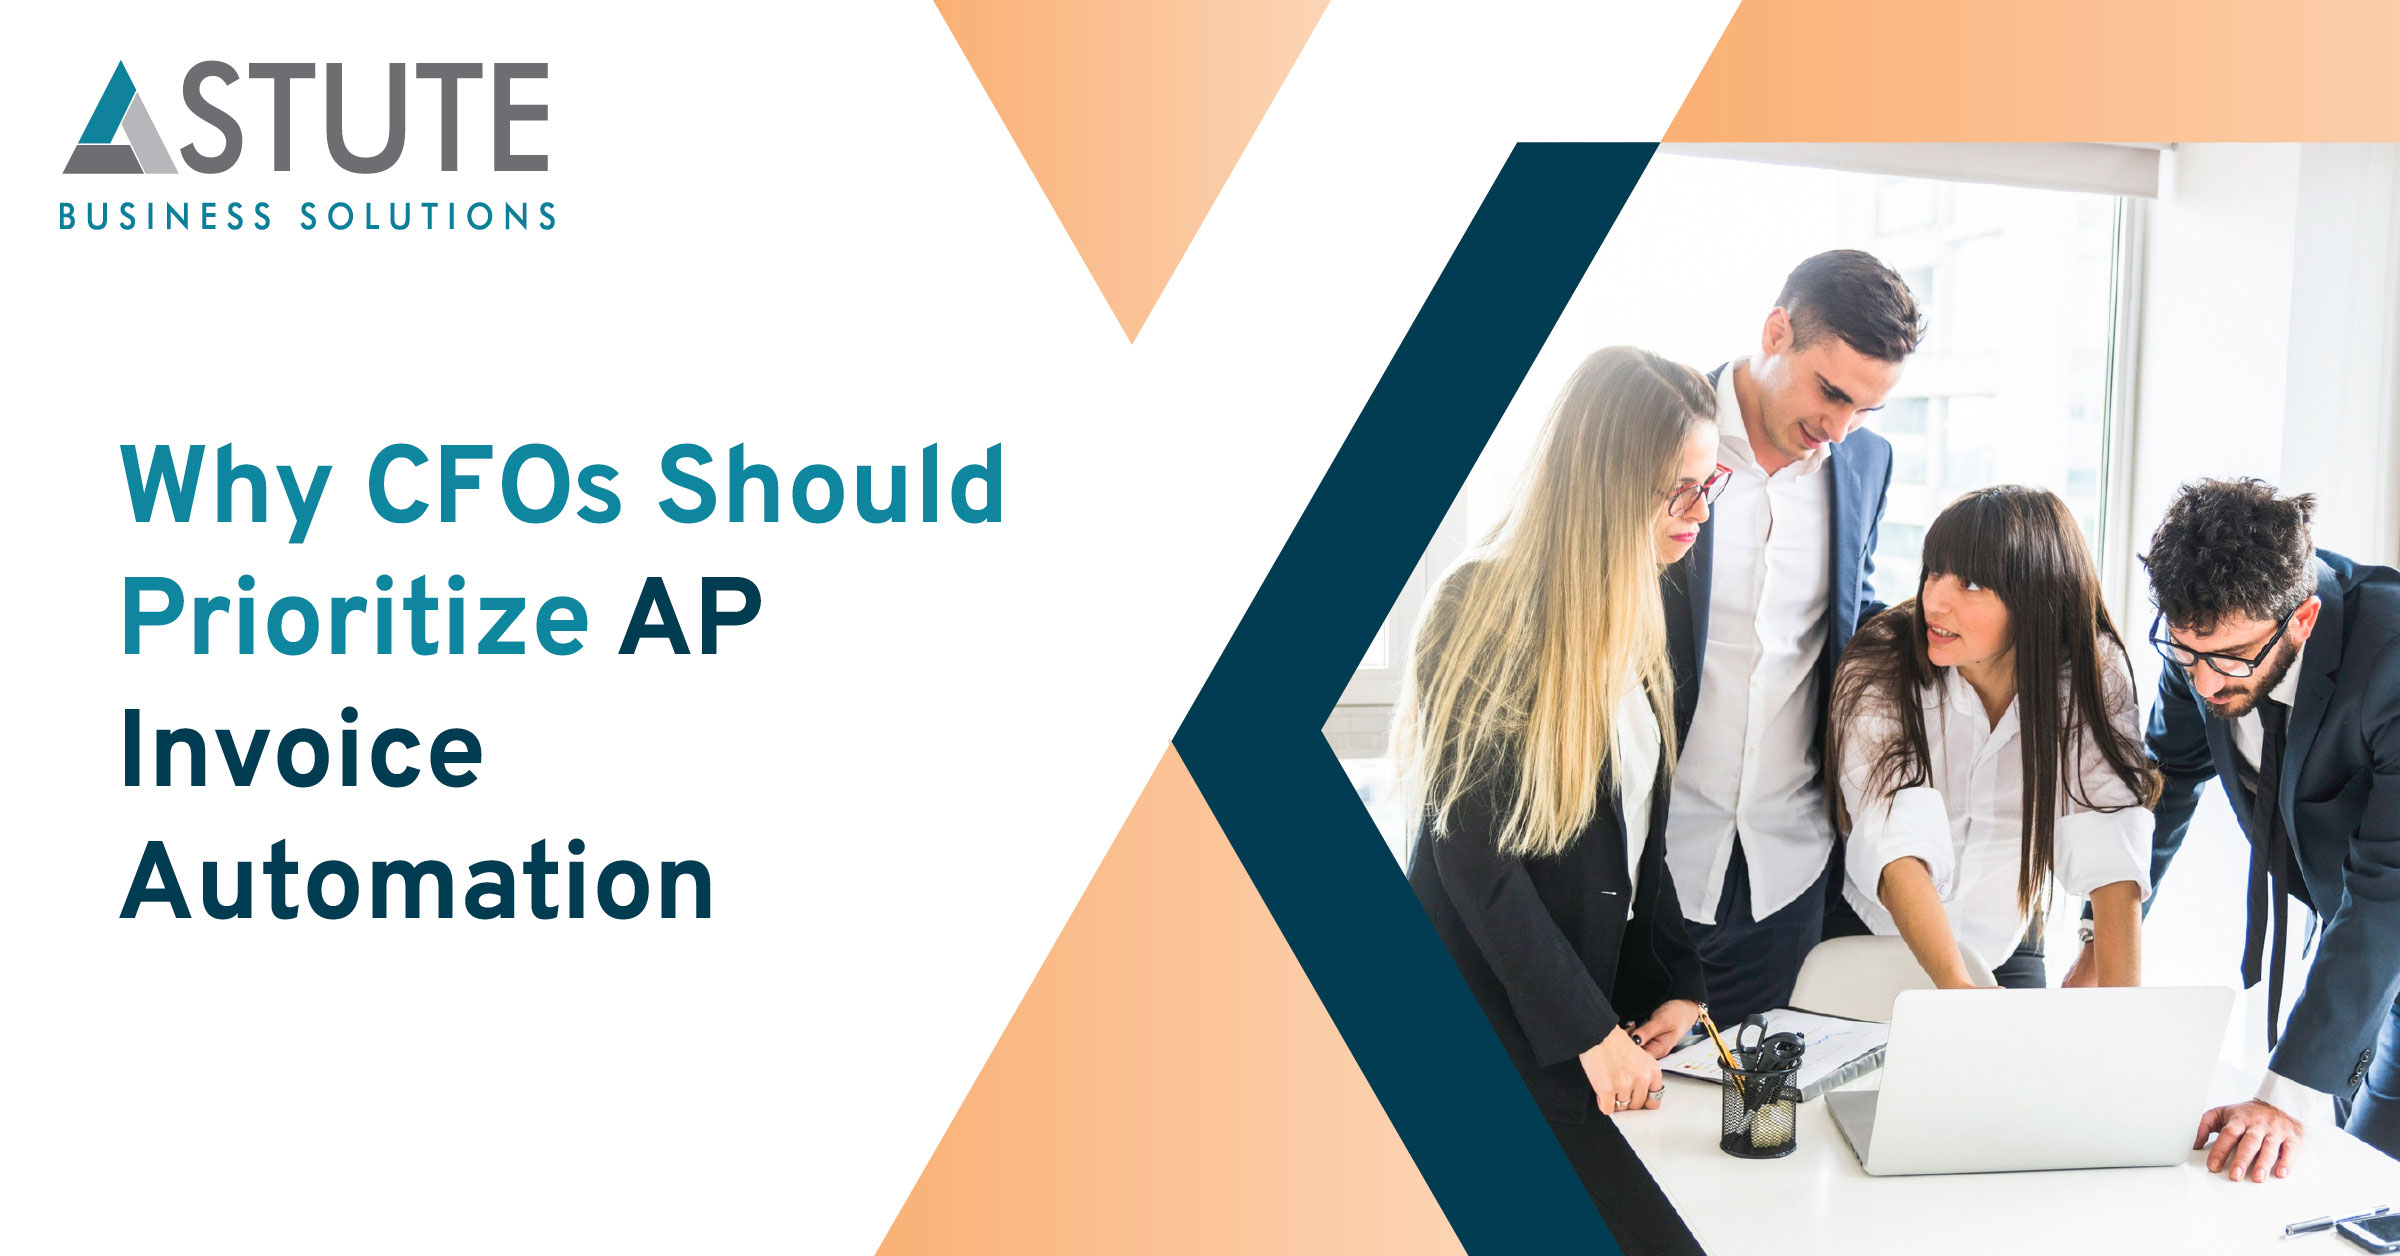 Why-CFOs-Should-Prioritize-AP-Invoice-Automation